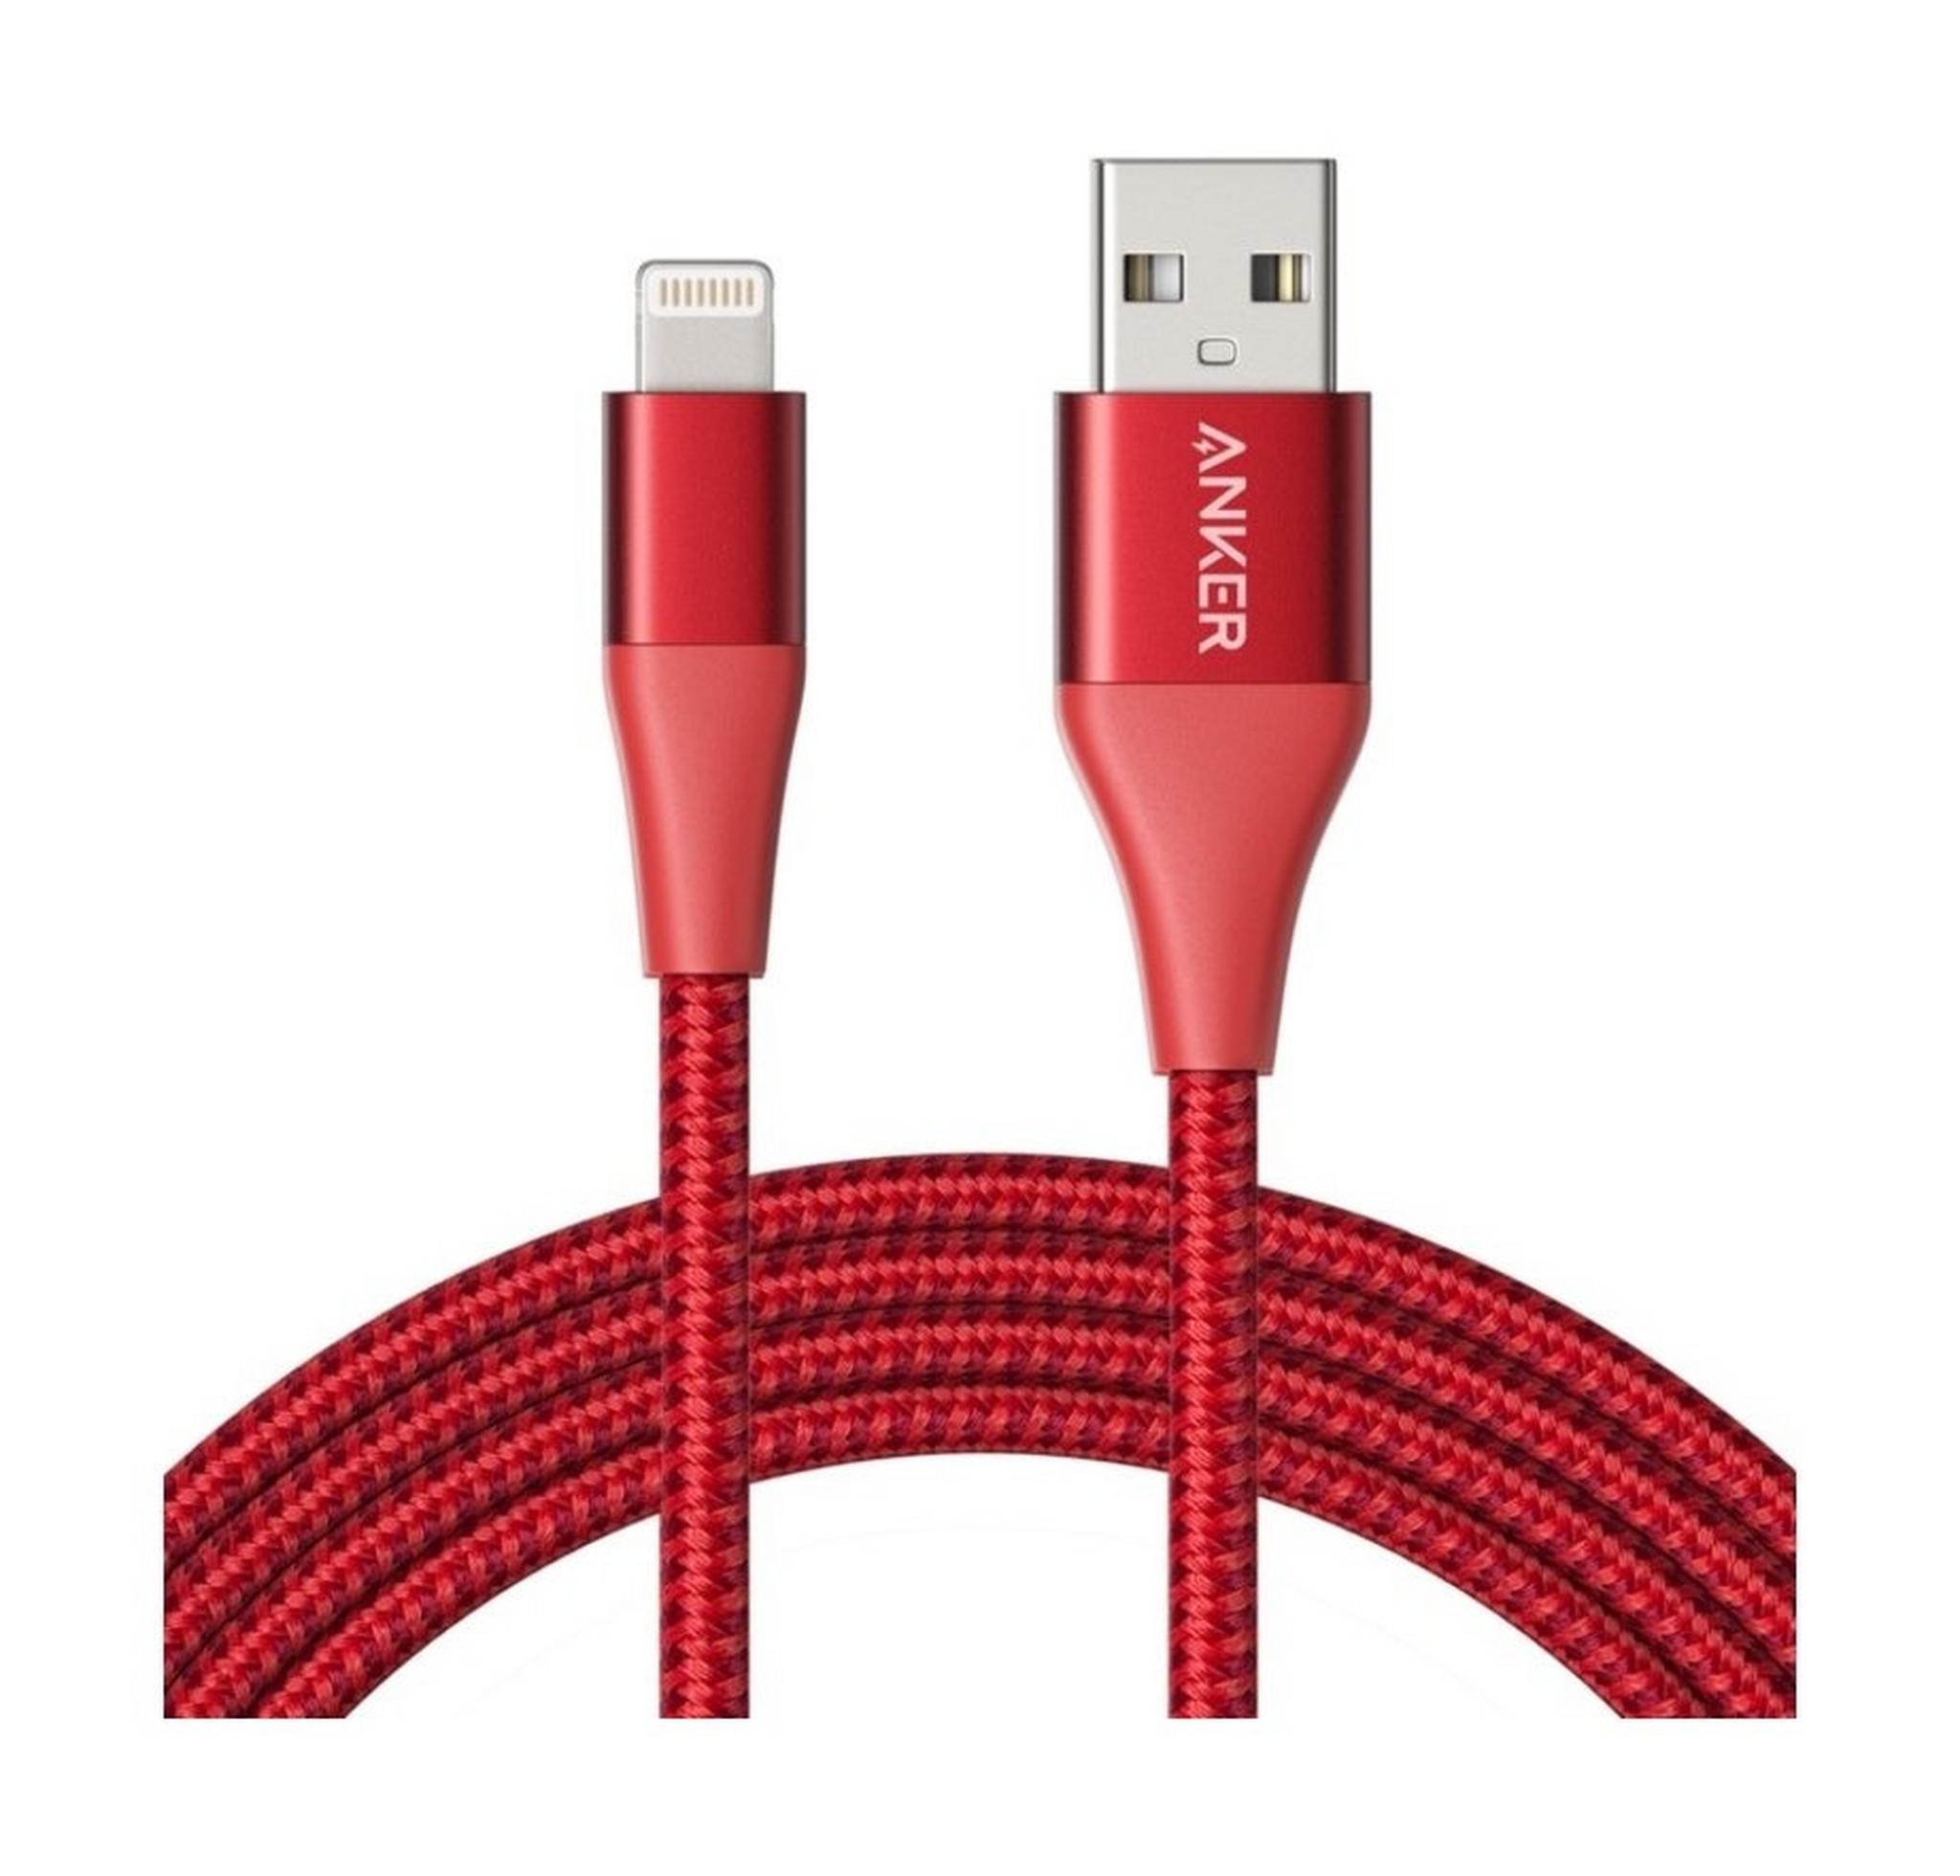 Anker Powerline+ II 3M Lightning Cable - Red